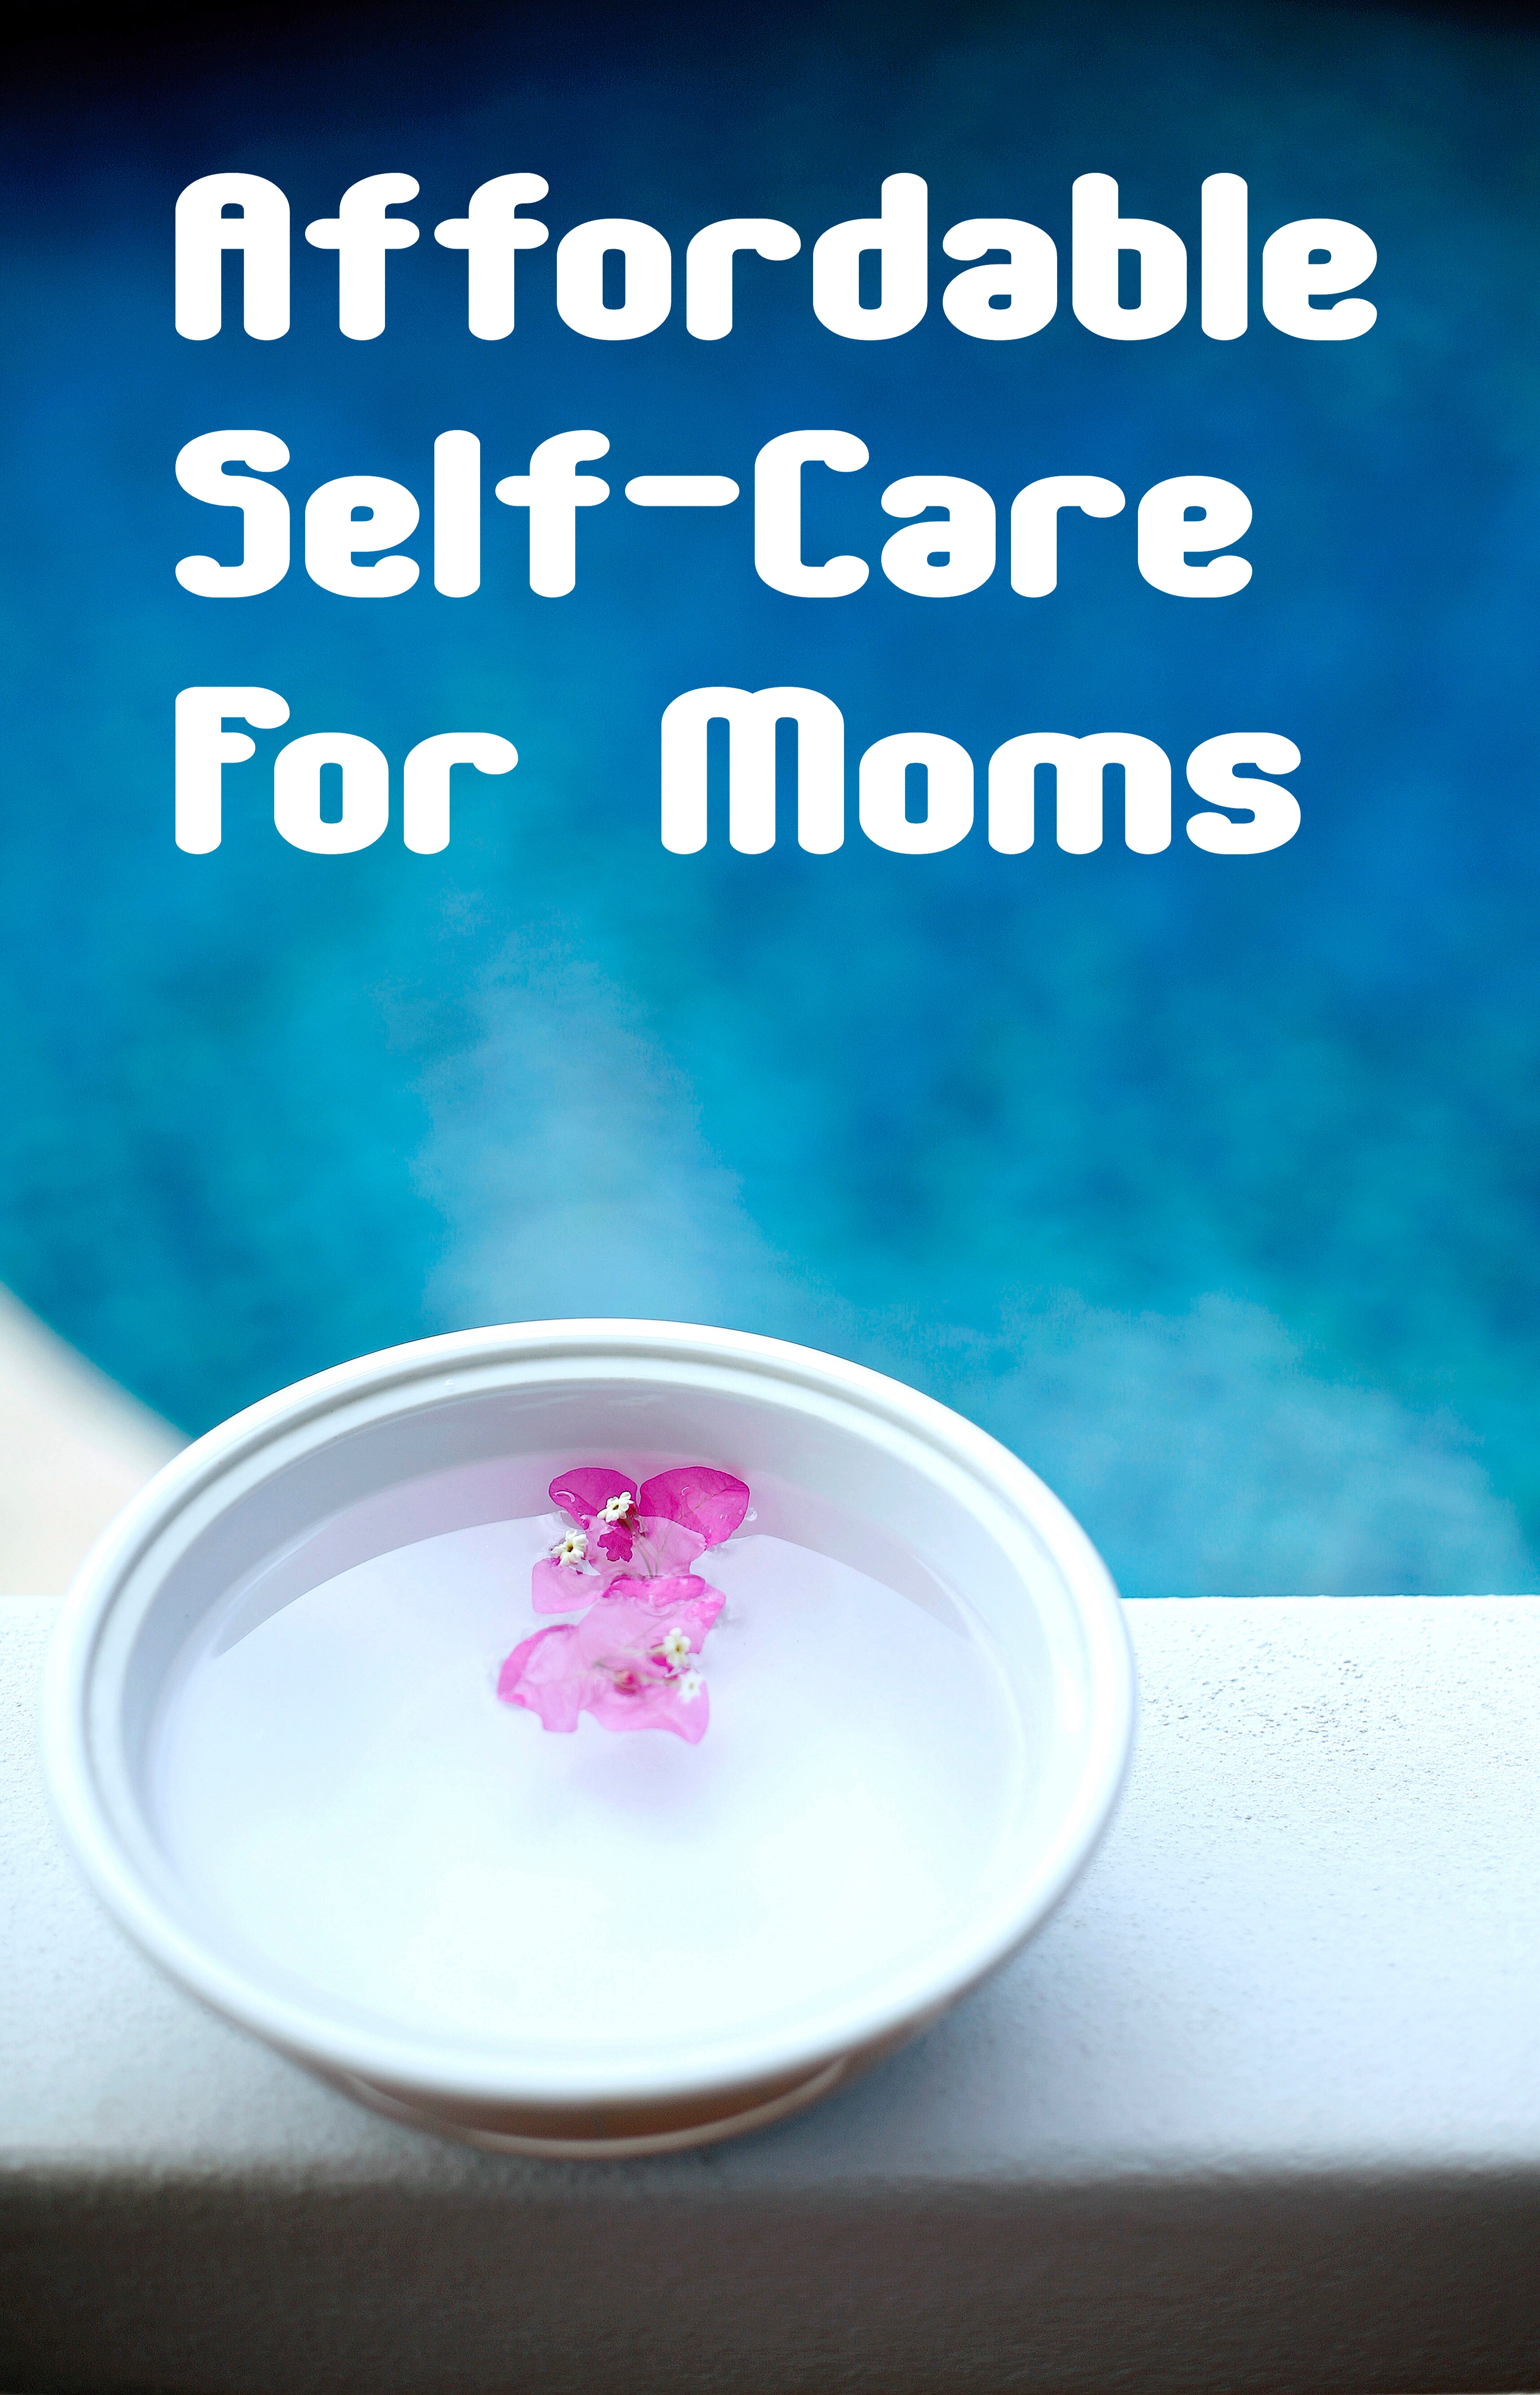 Affordable Self-care for moms pin